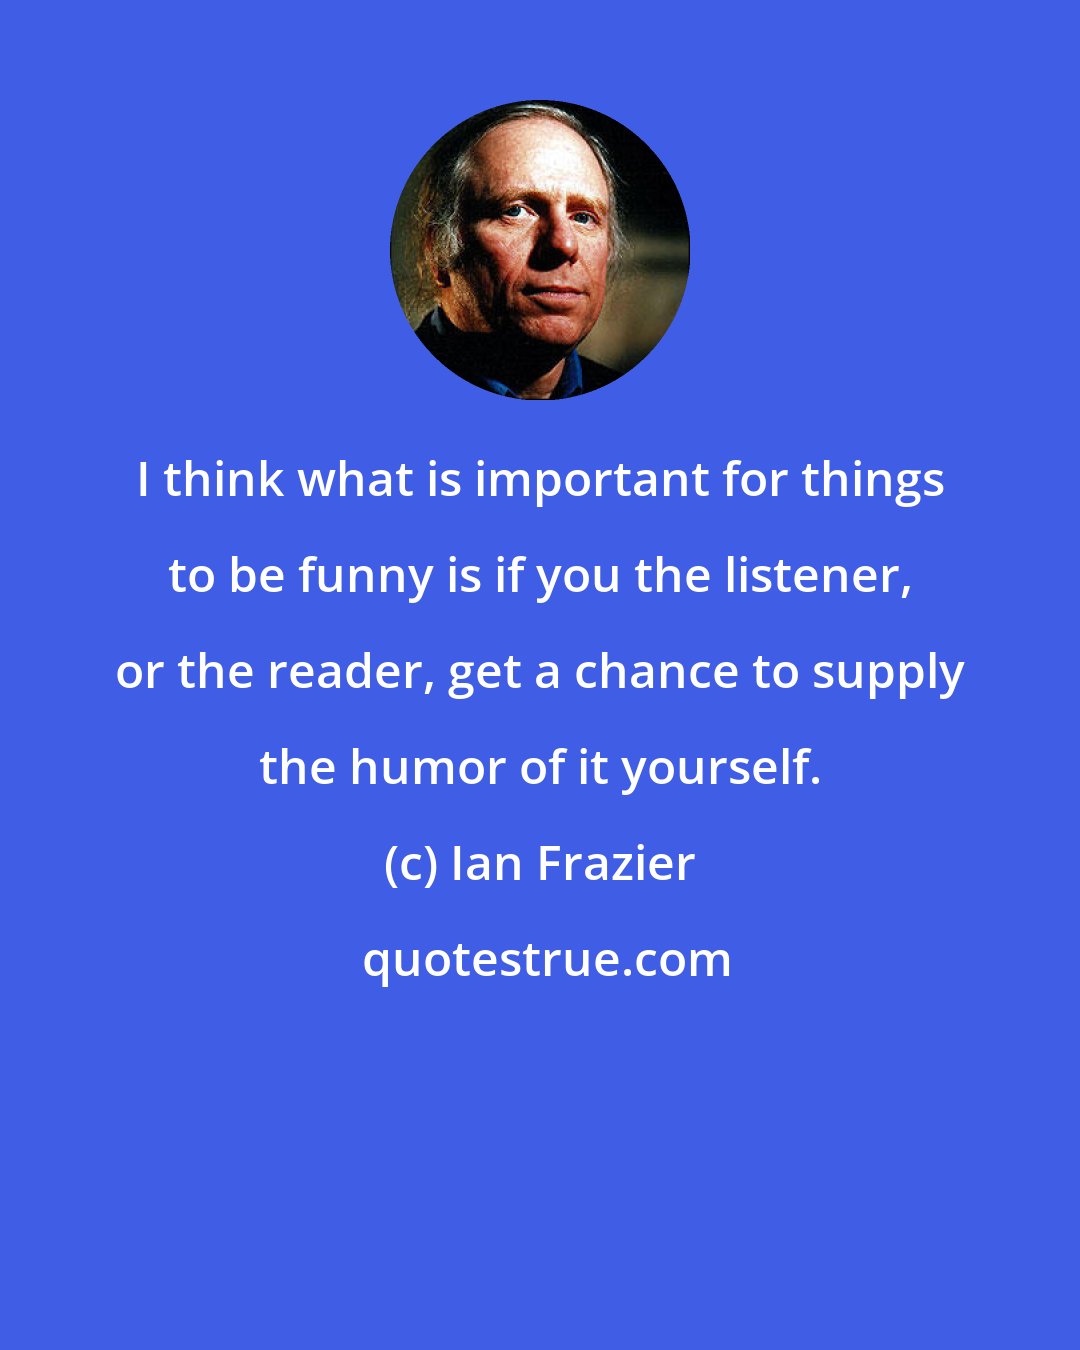 Ian Frazier: I think what is important for things to be funny is if you the listener, or the reader, get a chance to supply the humor of it yourself.